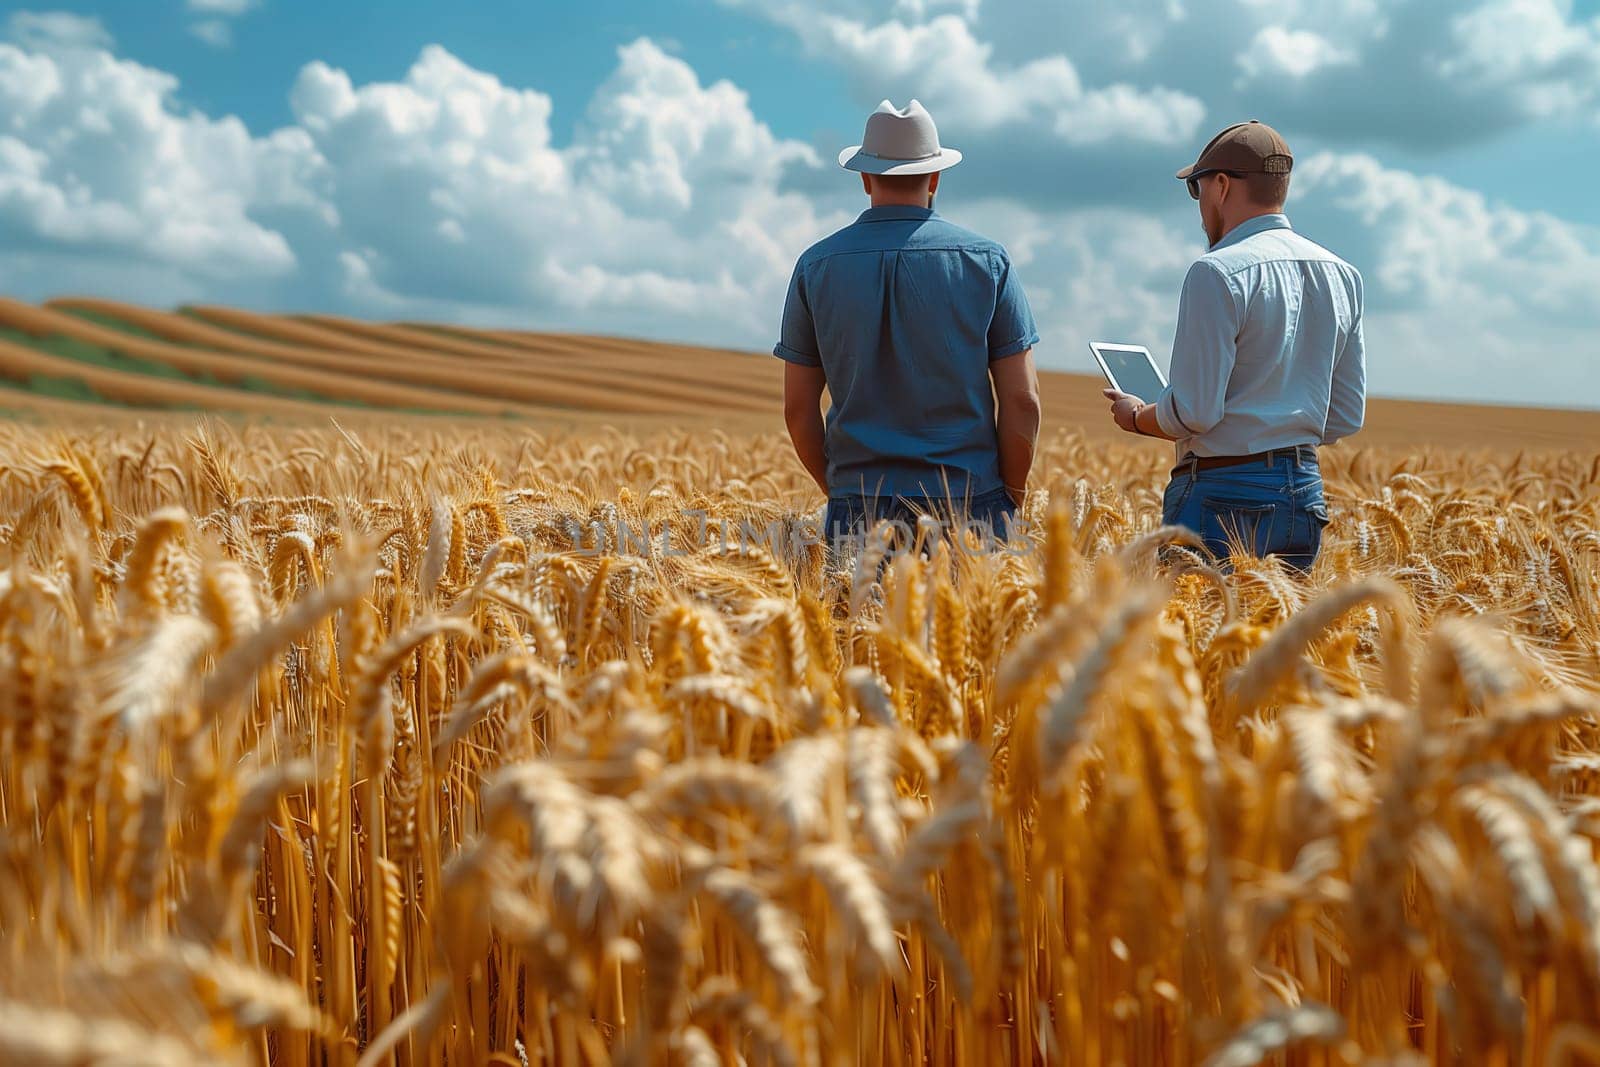 Two men wearing hats stand in a Khorasan wheat field, admiring the natural landscape on a tablet. The sky is filled with clouds in this ecoregion, showcasing the beauty of agriculture and grassland